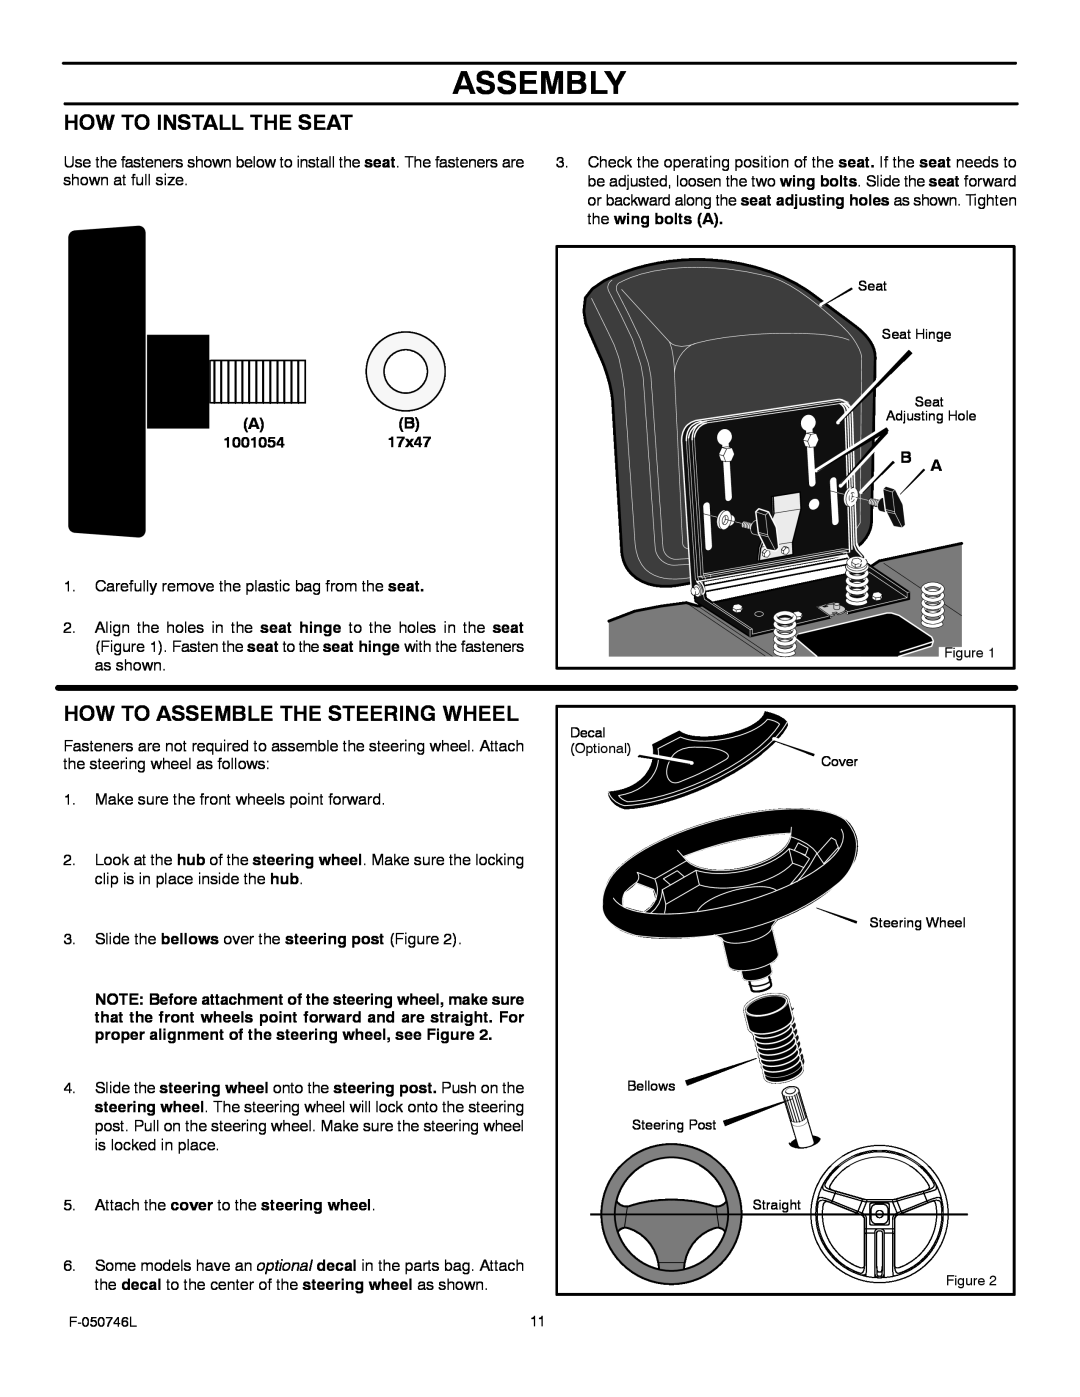 Murray 425016x48A manual Assembly, How To Install The Seat, How To Assemble The Steering Wheel 